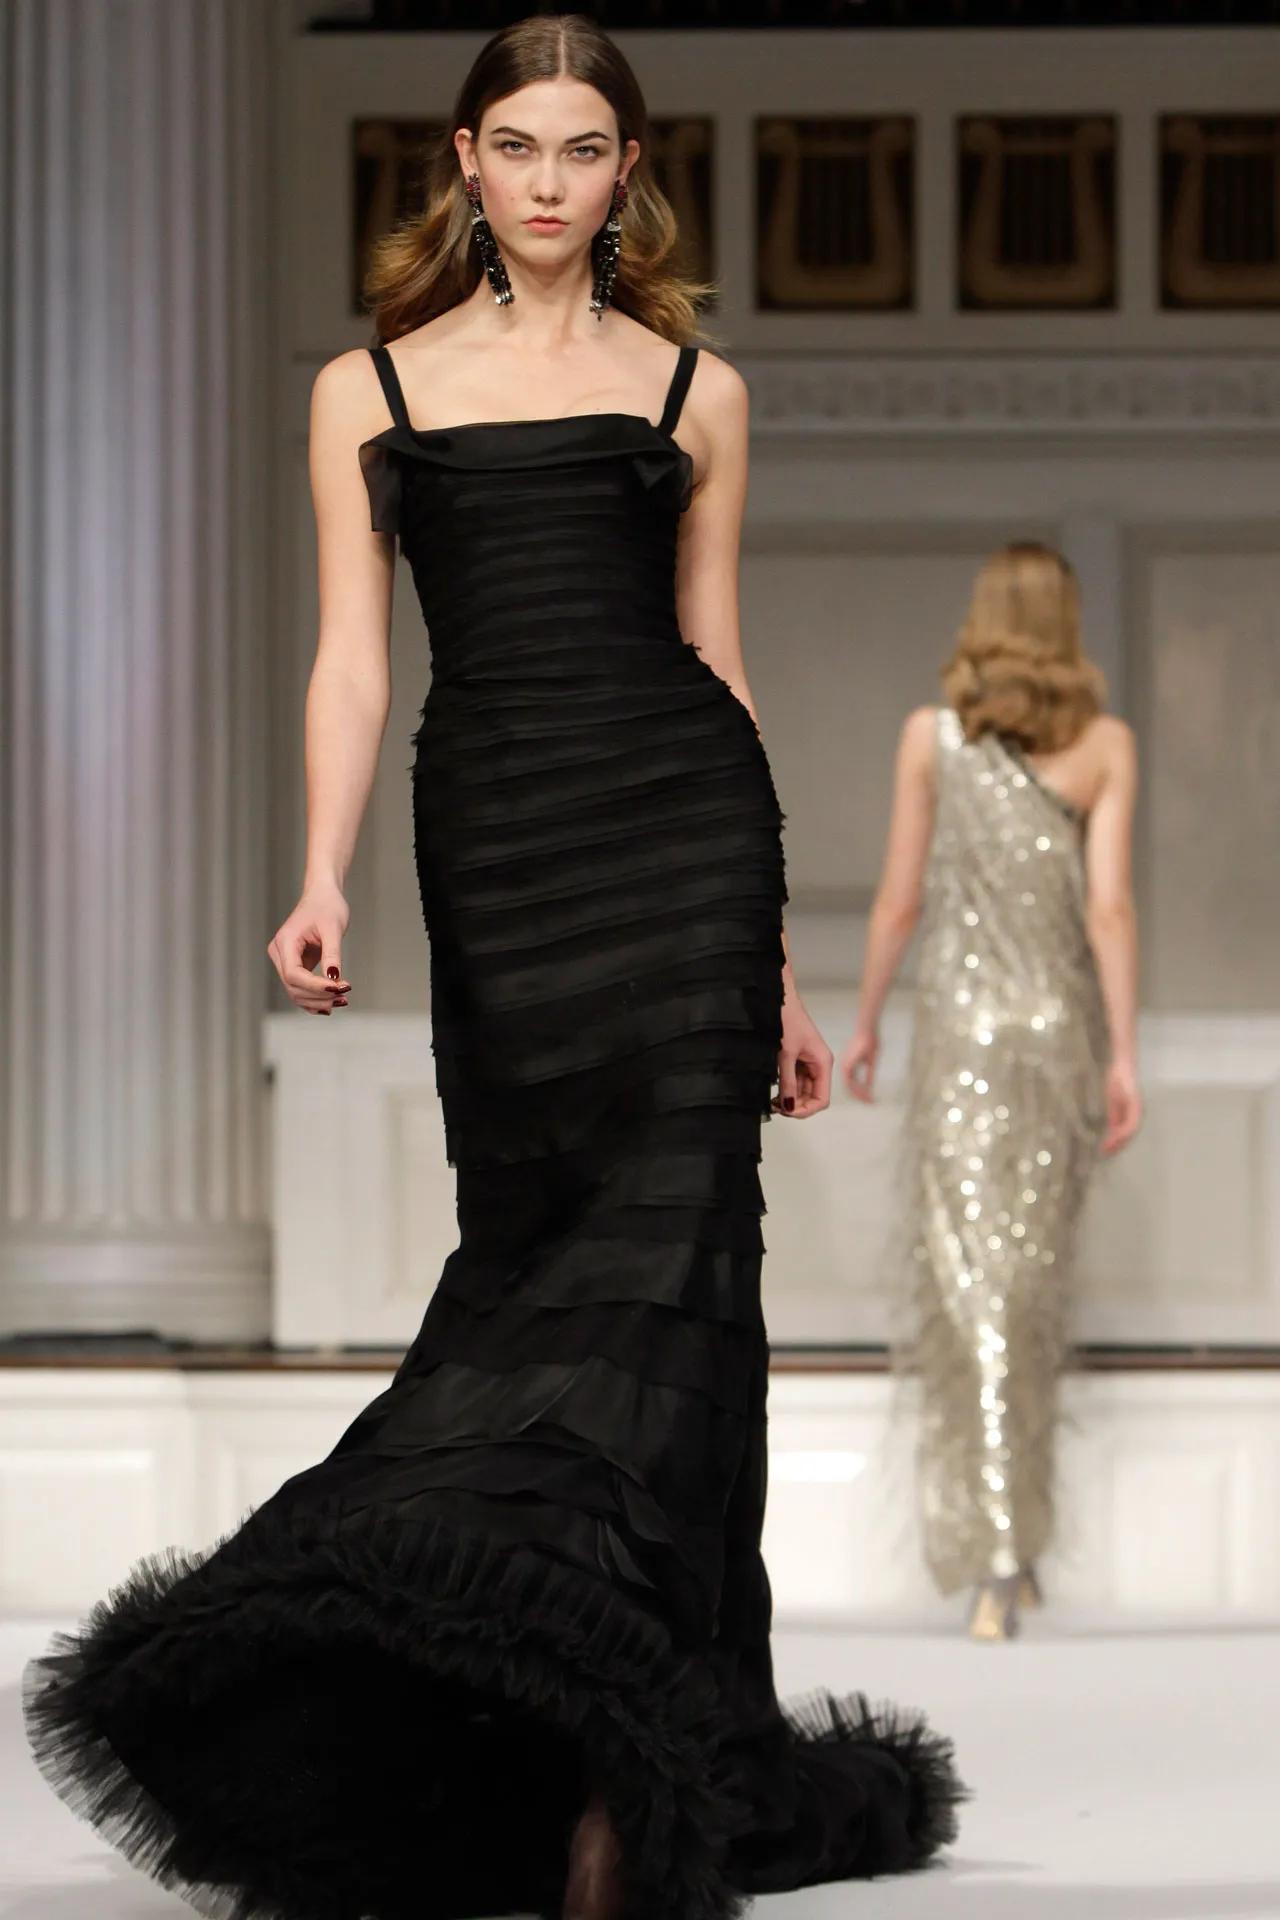 A truly magnificent and well-documented Oscar de la Renta black ruched hourglass mermaid gown dating back to his 2011 fall/winter collection. As shown, our glamorous show stopper was his runway finale look #60. This iconic gown was also Penelope